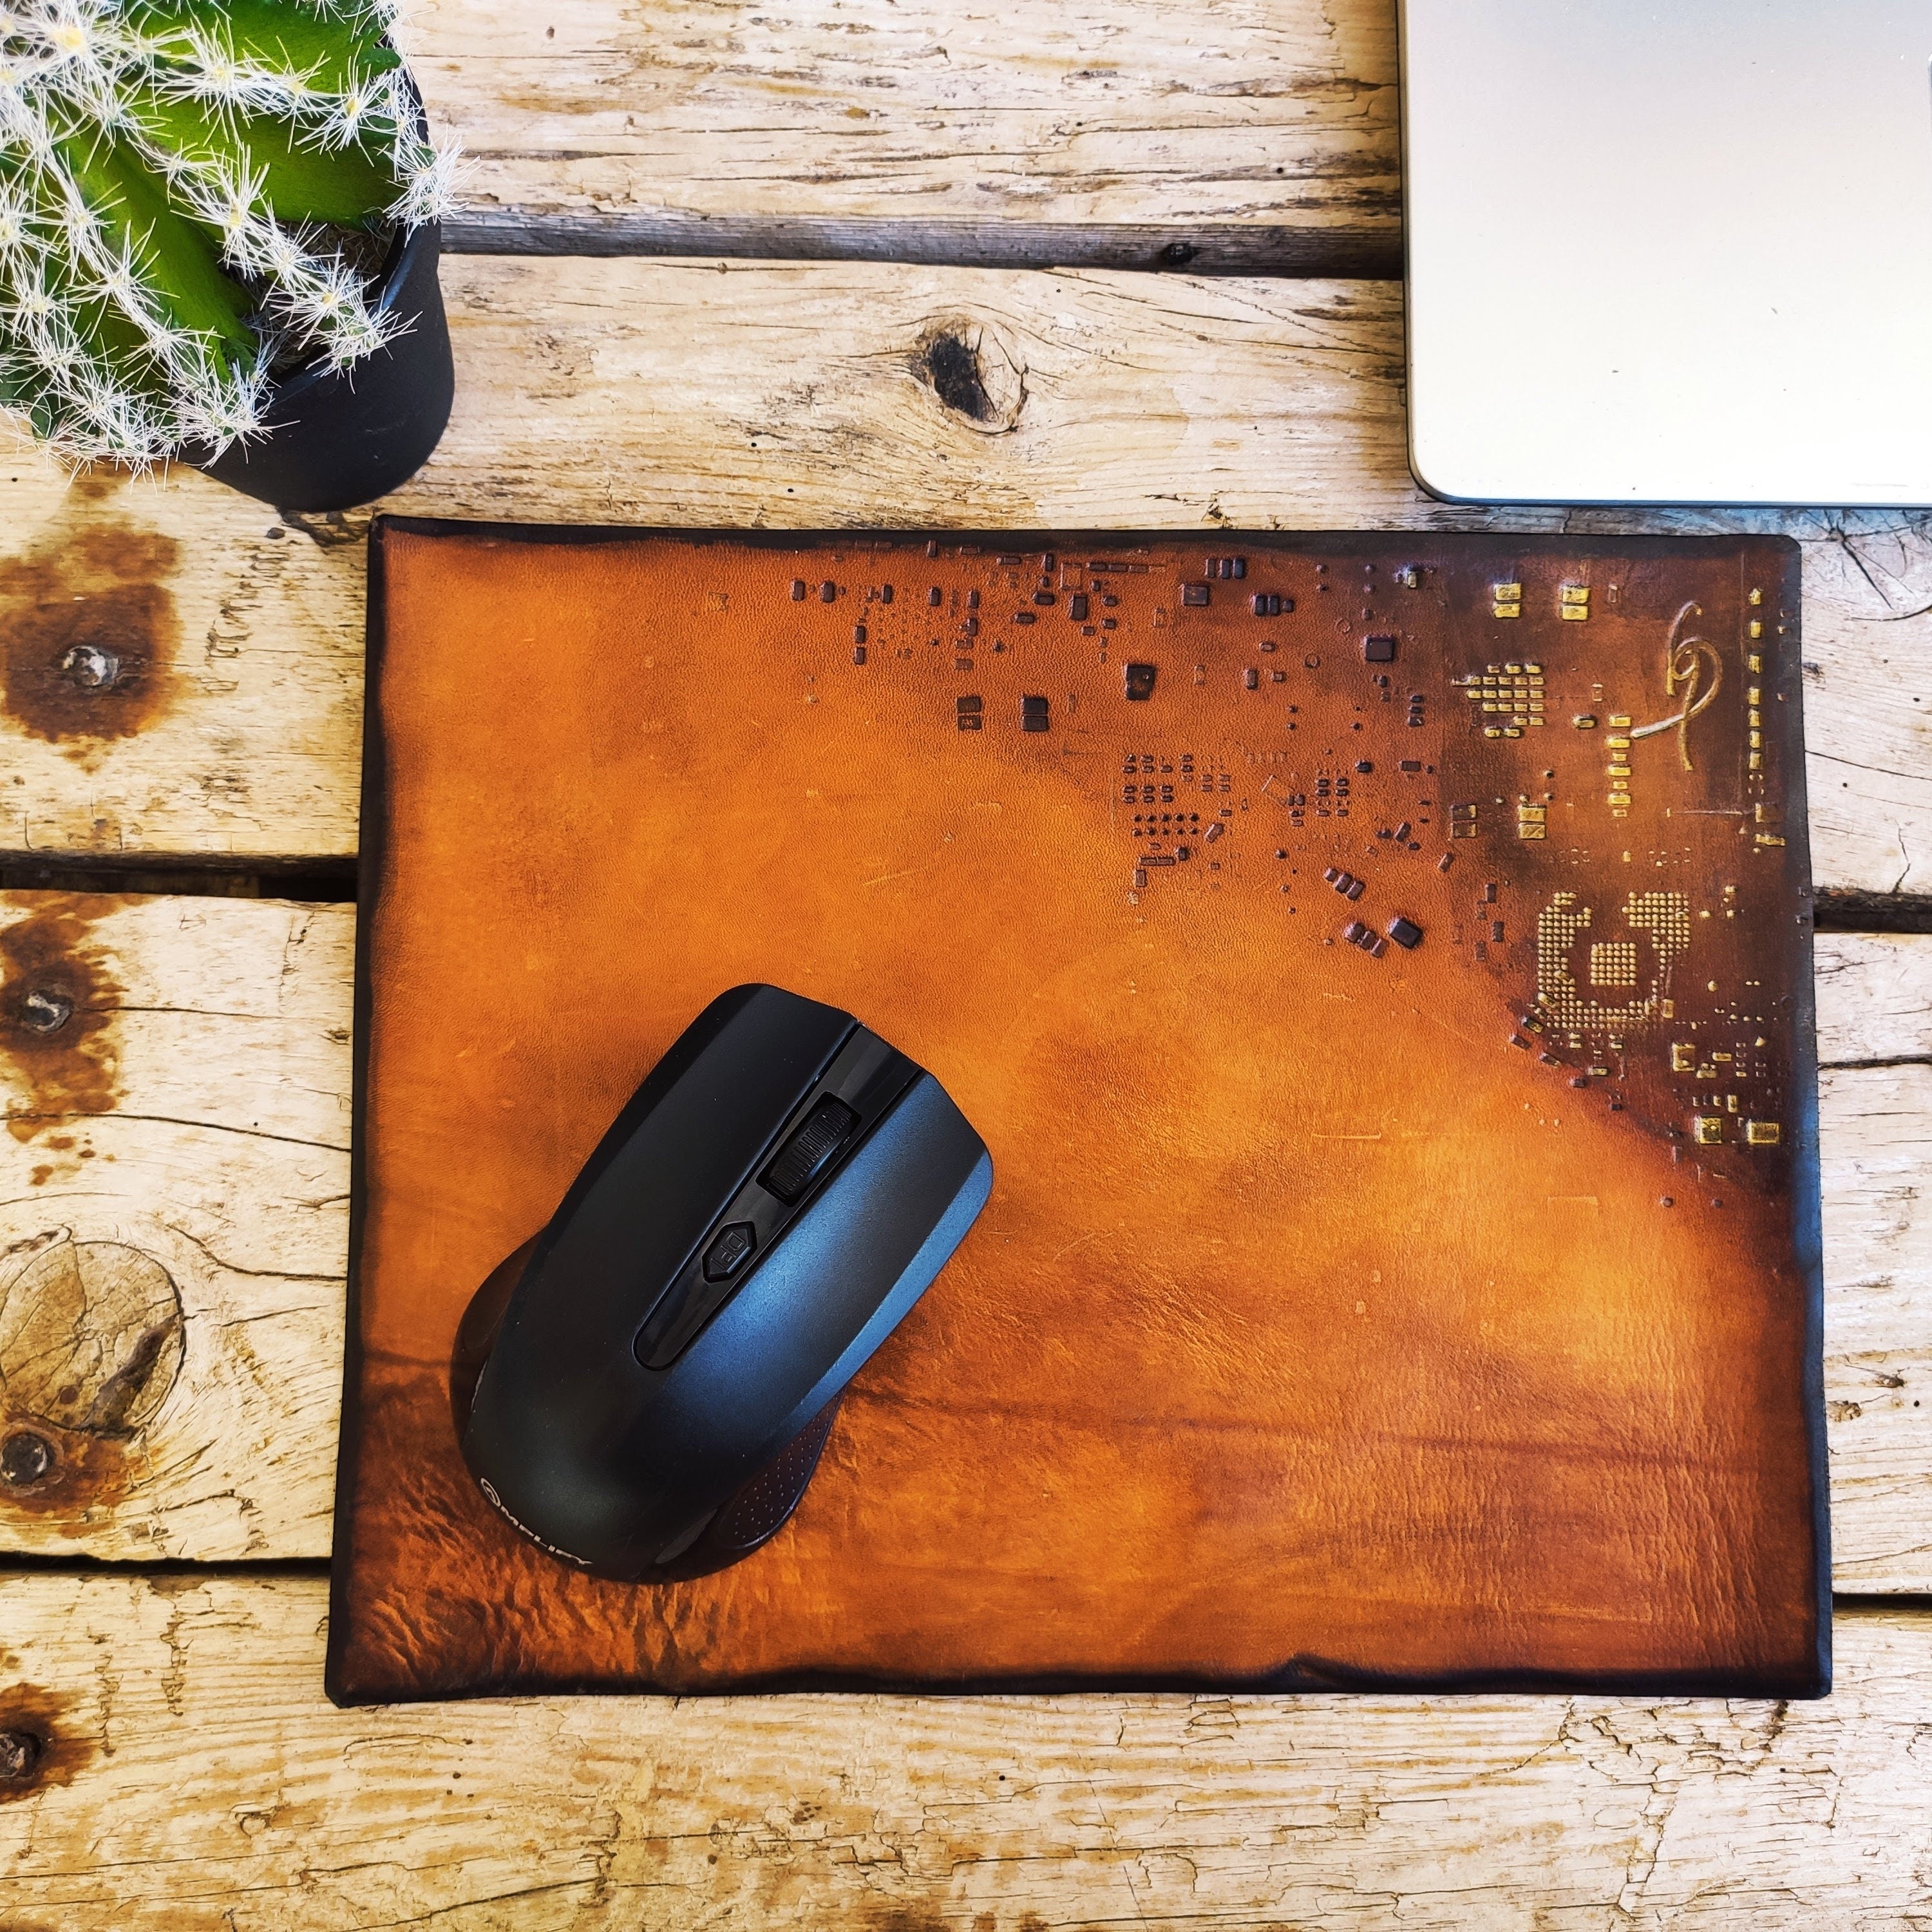 Personalized Leather Mousepad in shades of Brown with gold stamping of Computer parts made by hand, perfect Gift for the Office or for WFH